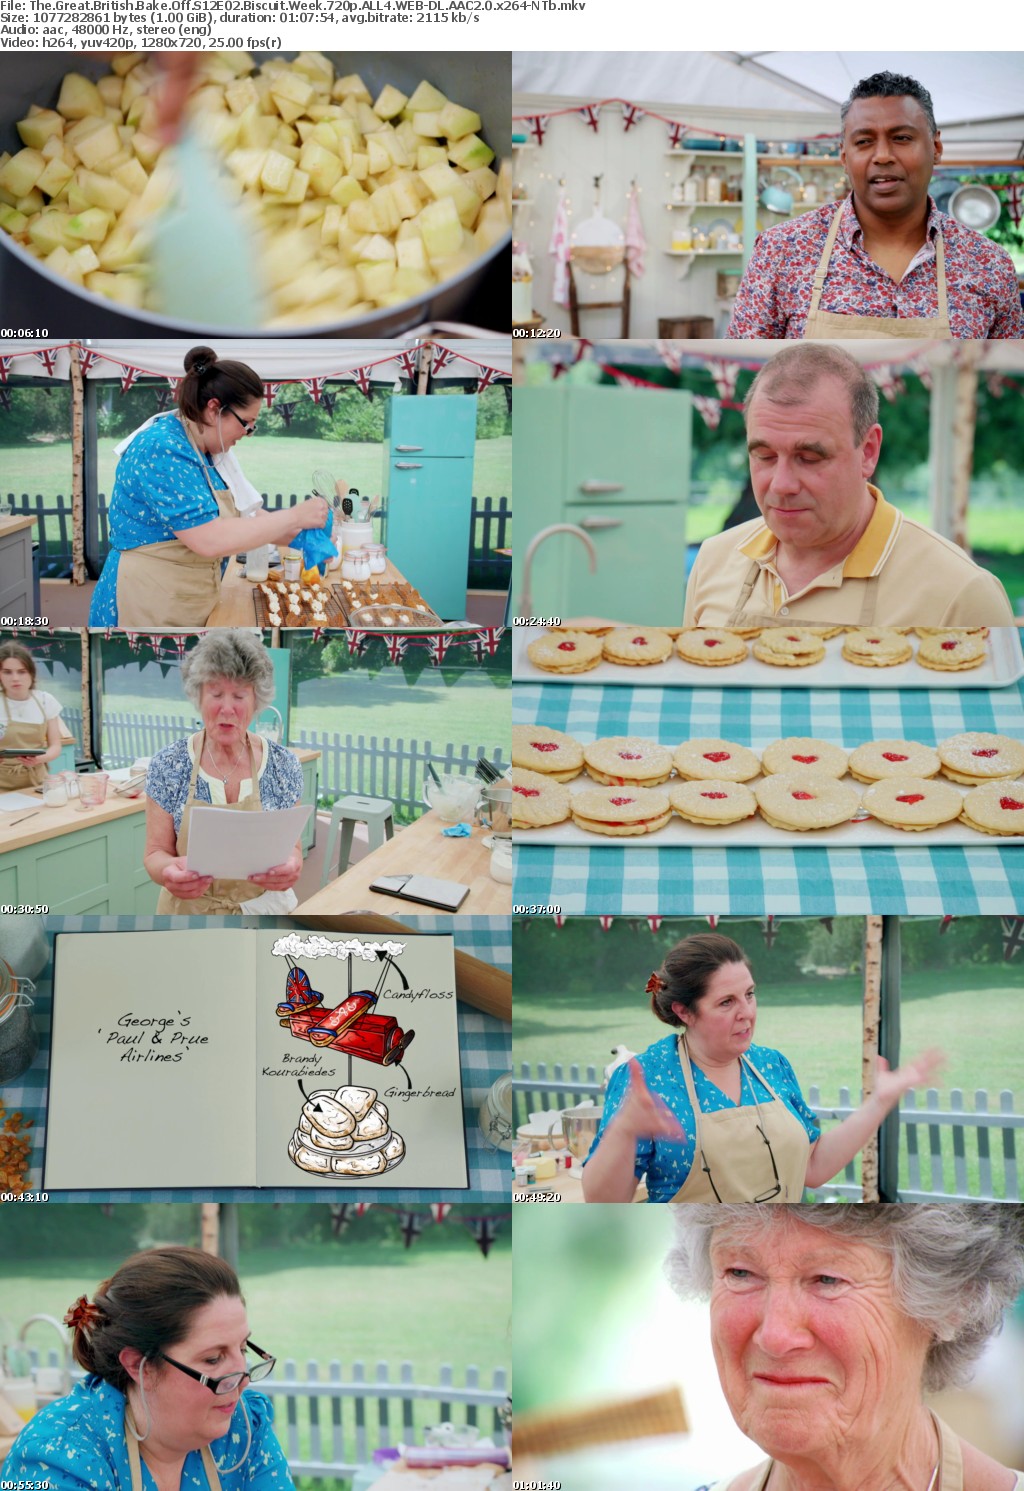 The Great British Bake Off S12E02 Biscuit Week 720p ALL4 WEBRip AAC2 0 H264-NTb